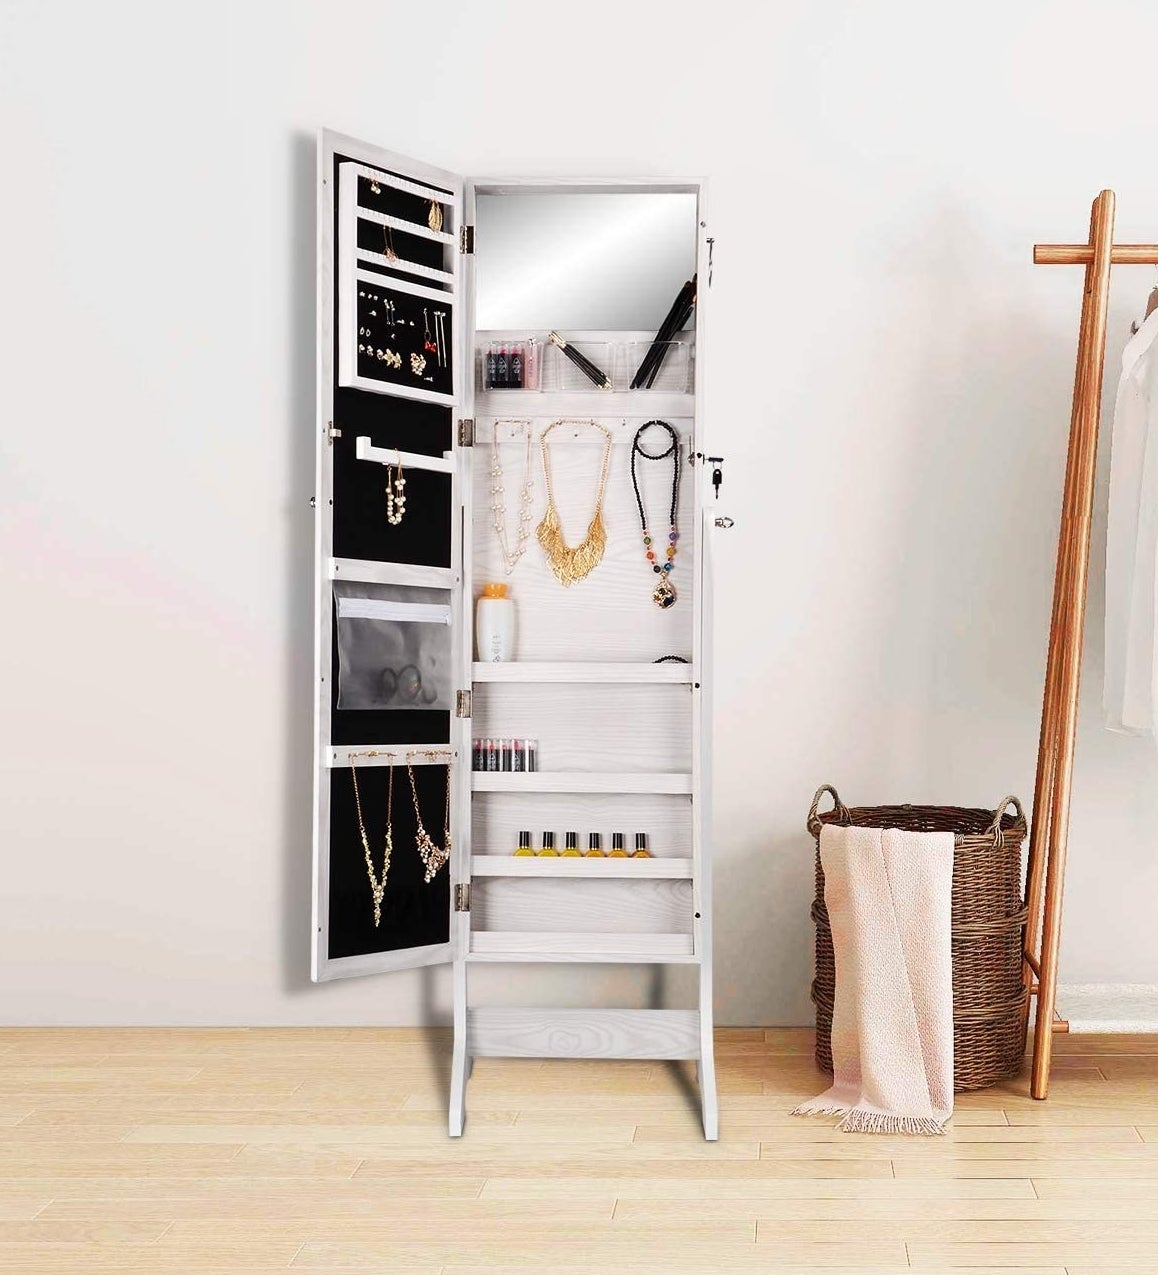 a stylish mirror opened to show its inner shelves and storage space